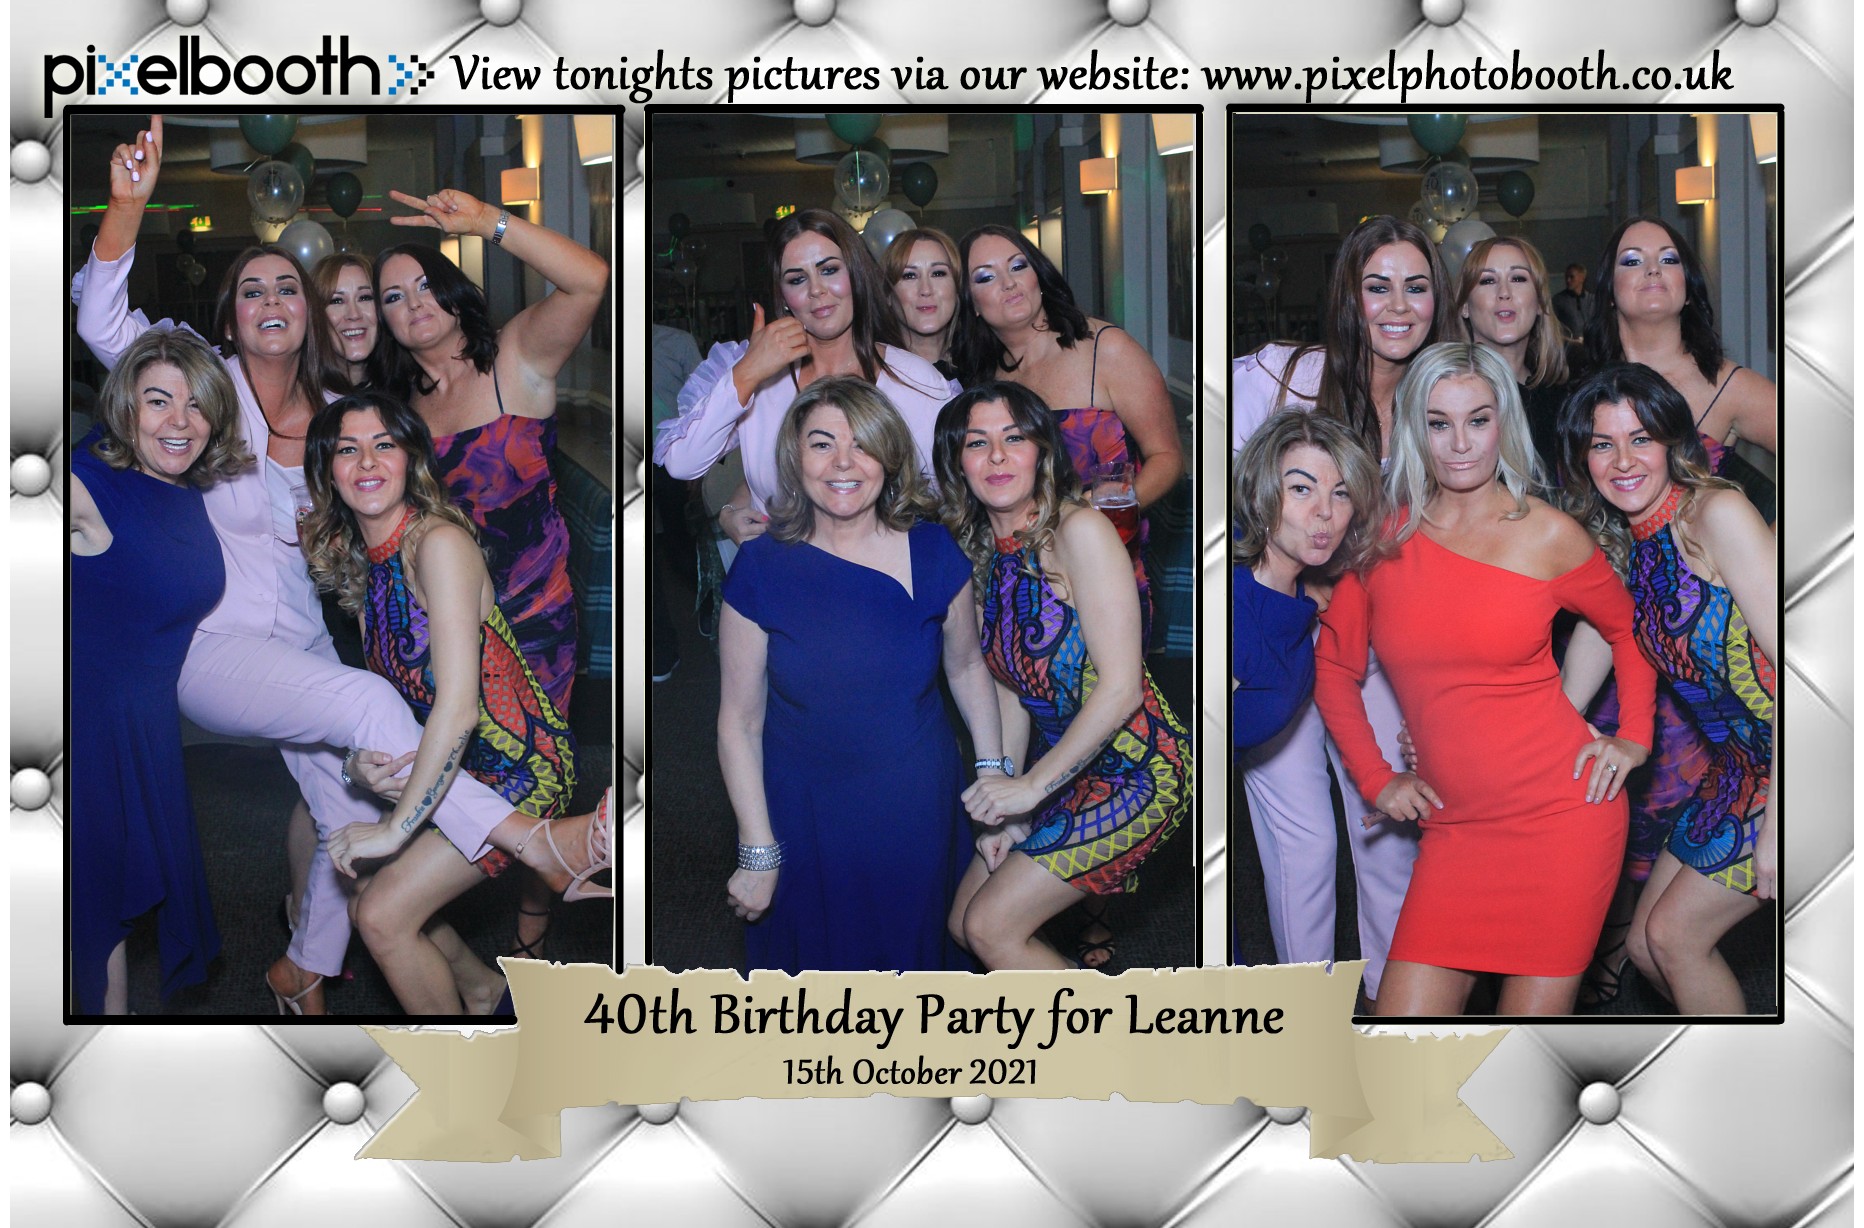 15th Oct 2021: Leanne's 40th Birthday Party at St Aiden's, Huyton